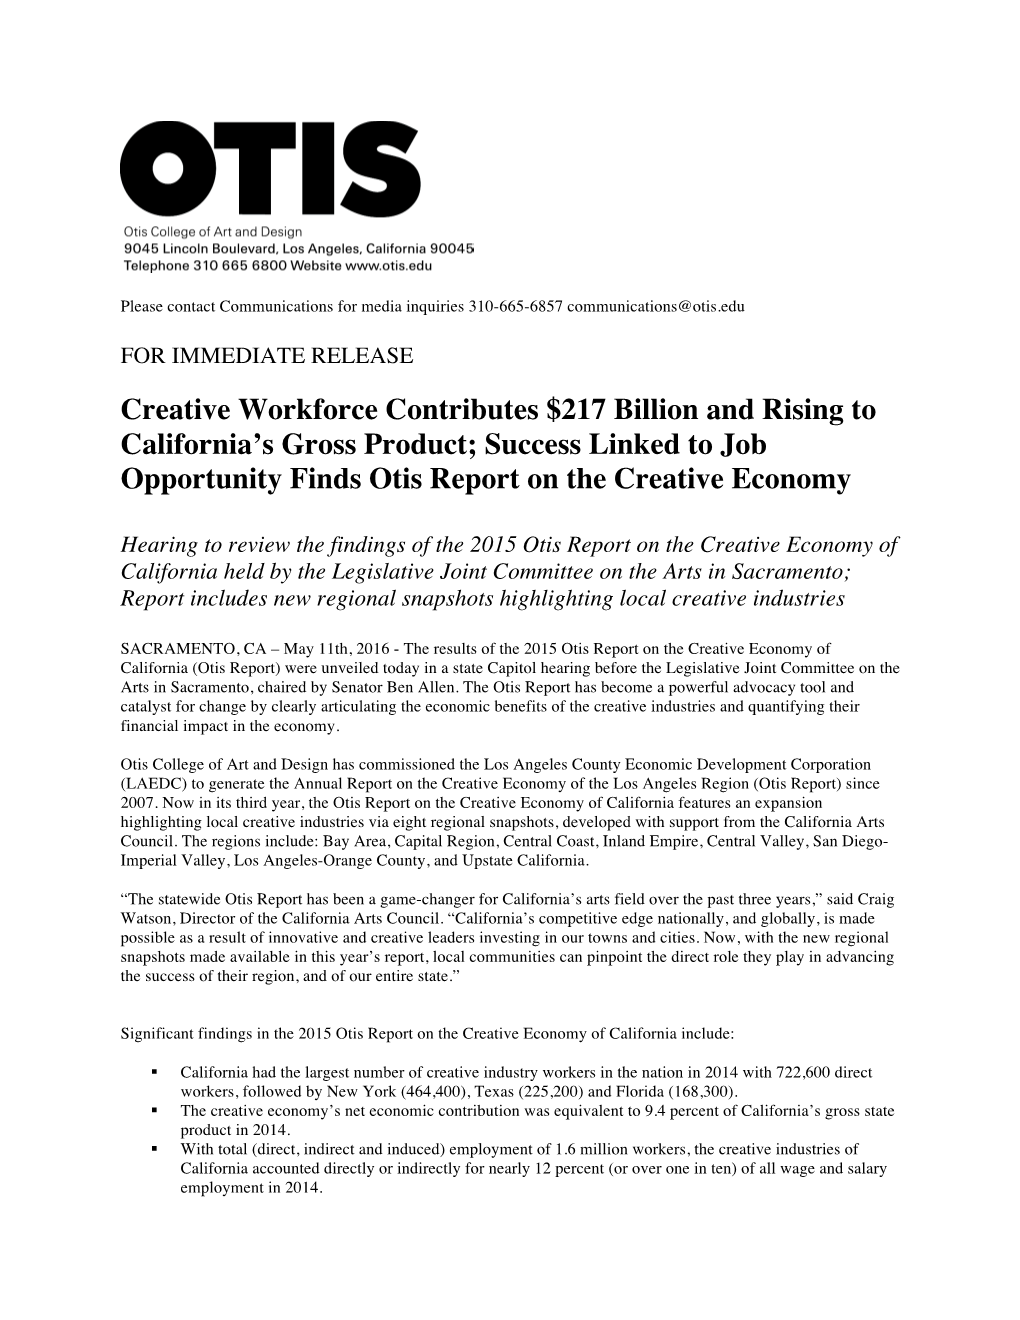 Press Release from Otis College for the California Edition